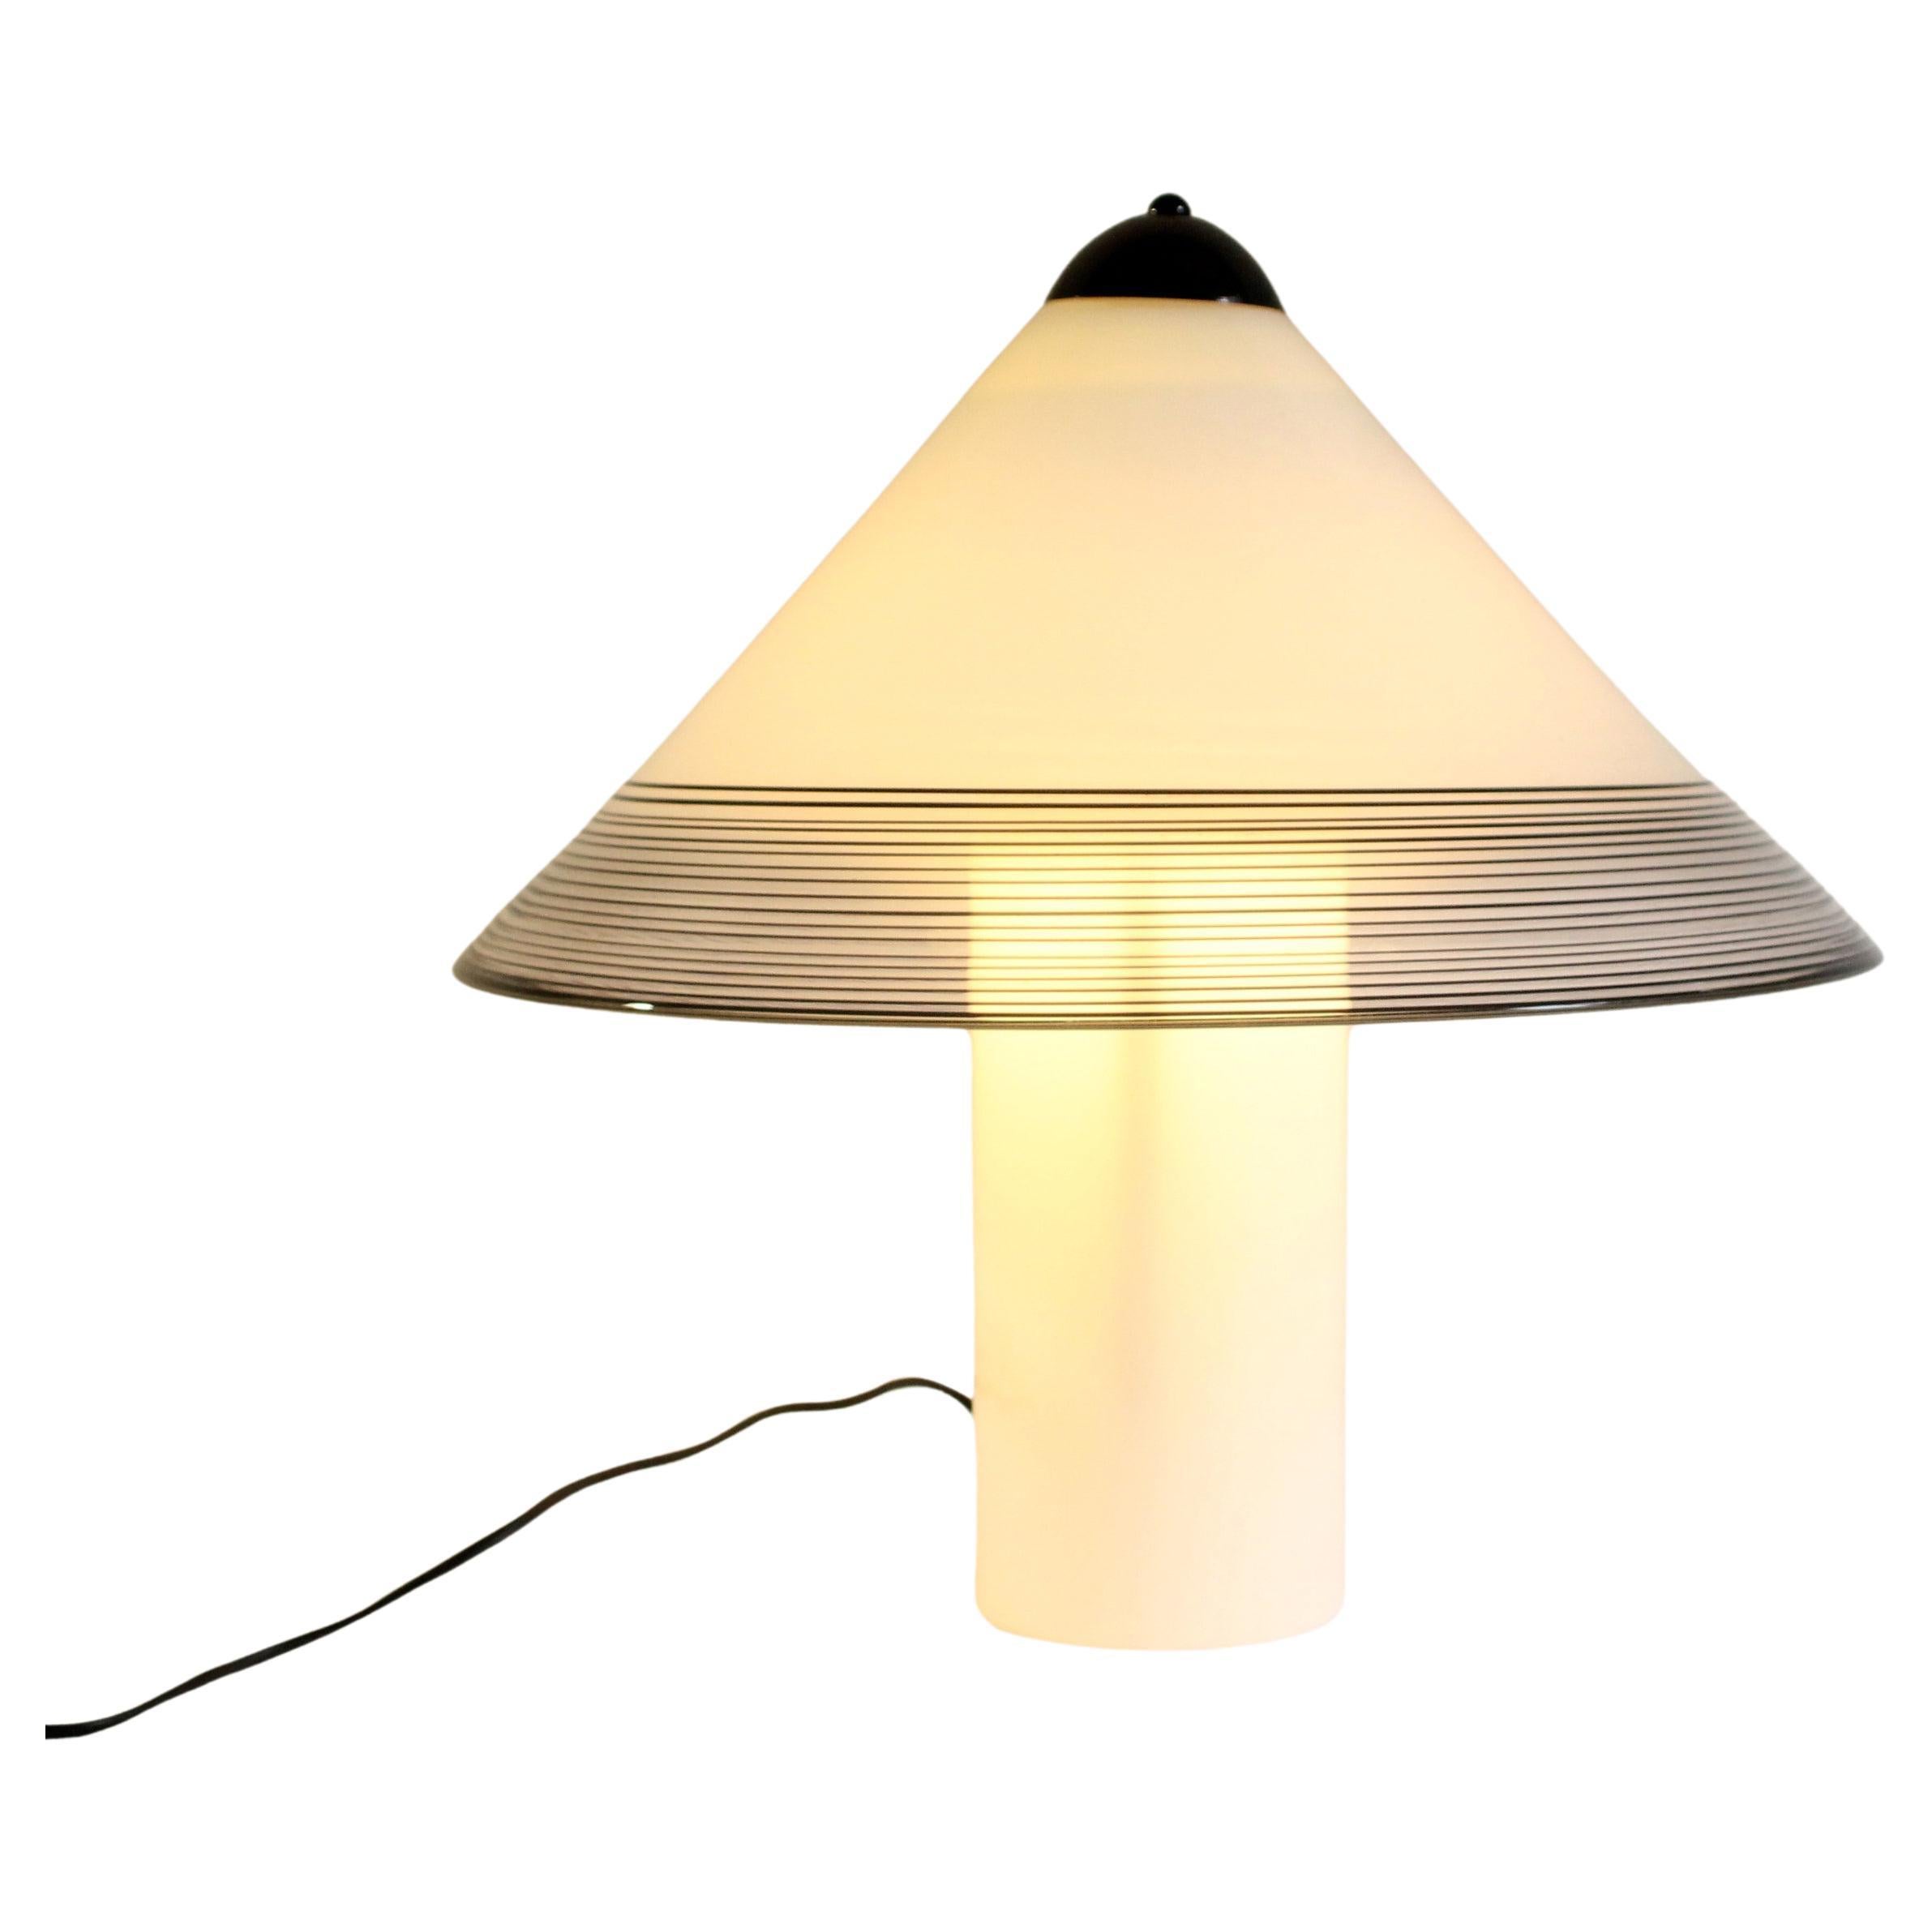 Large Murano table lamp by "iTRE" Murano (51Hx51cm) 1970s. Mid-century modern